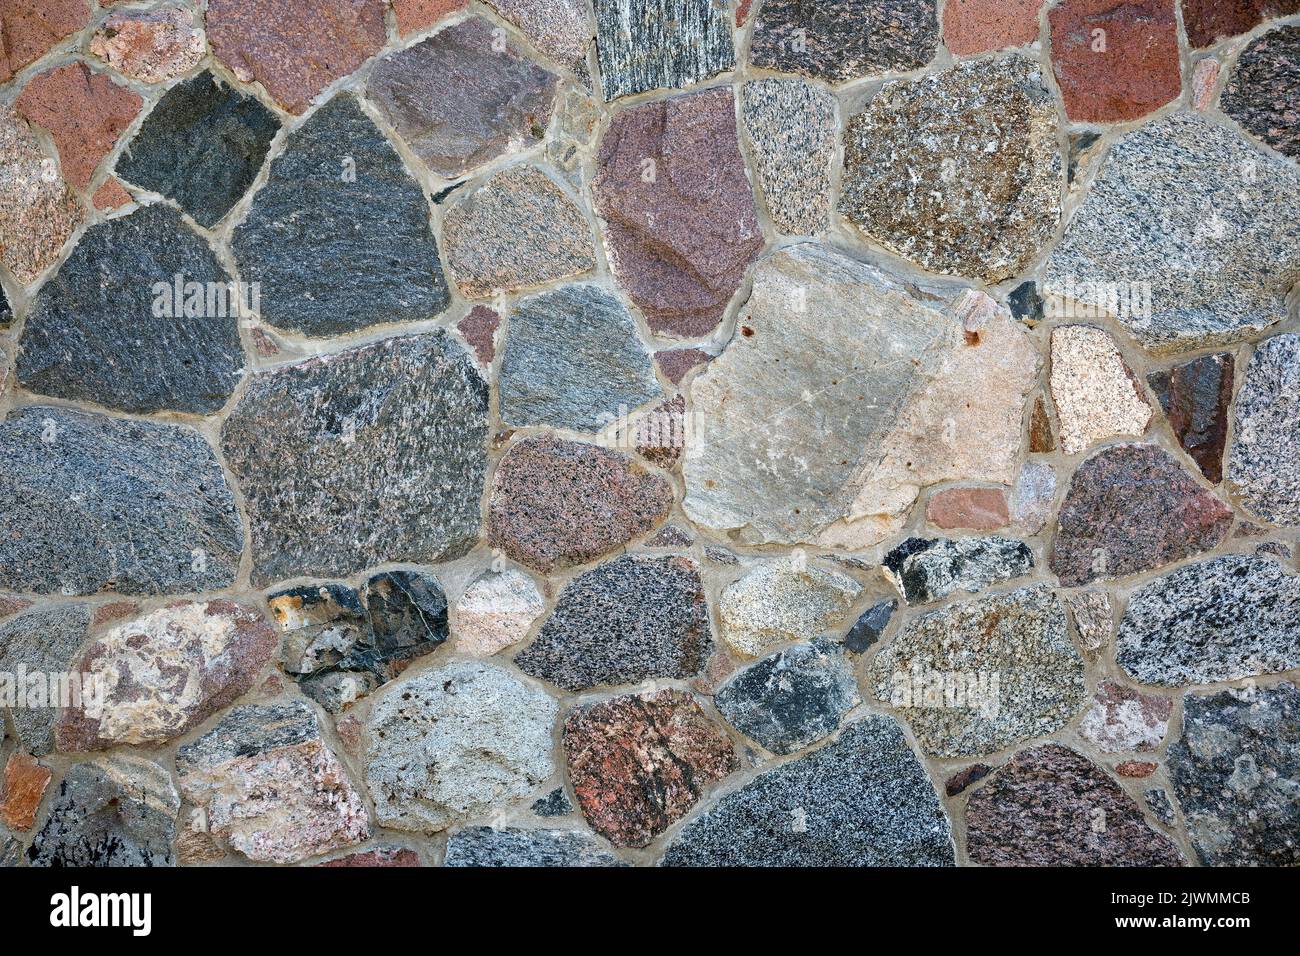 Stone wall with different colors and size of rocks Stock Photo